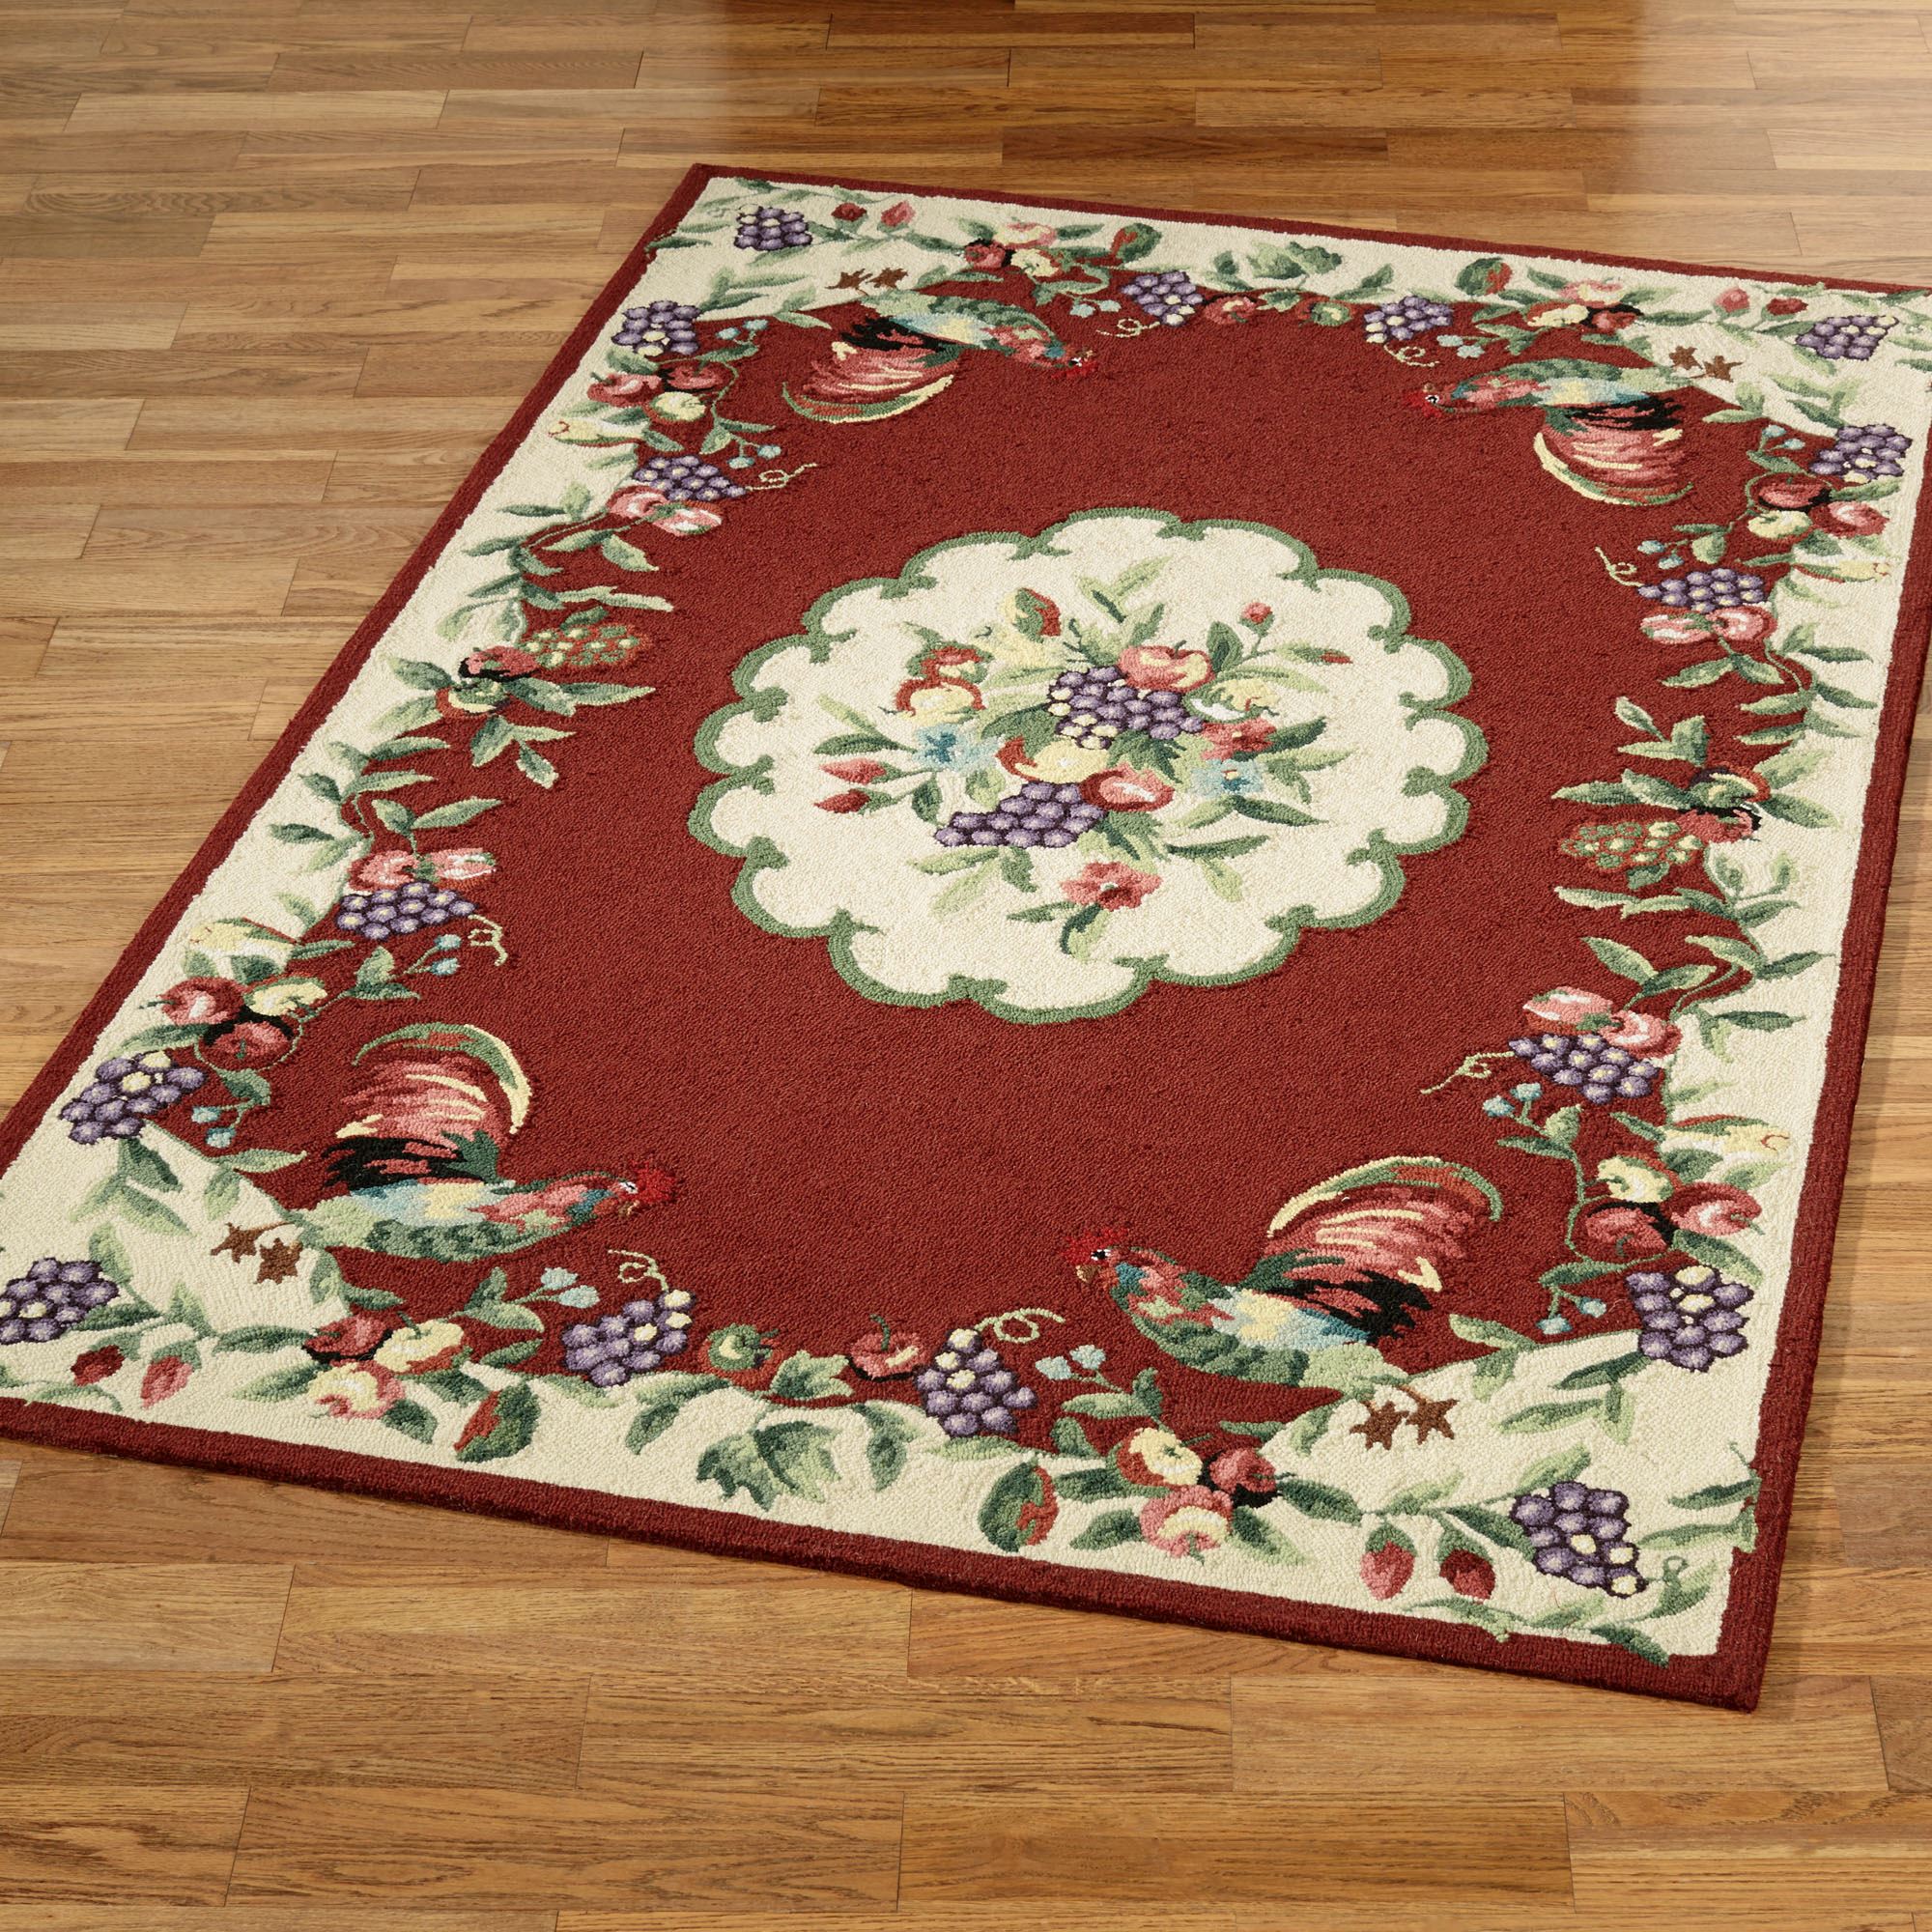 Rooster rugs sonoma rooster rectangle rug NAEGUOE